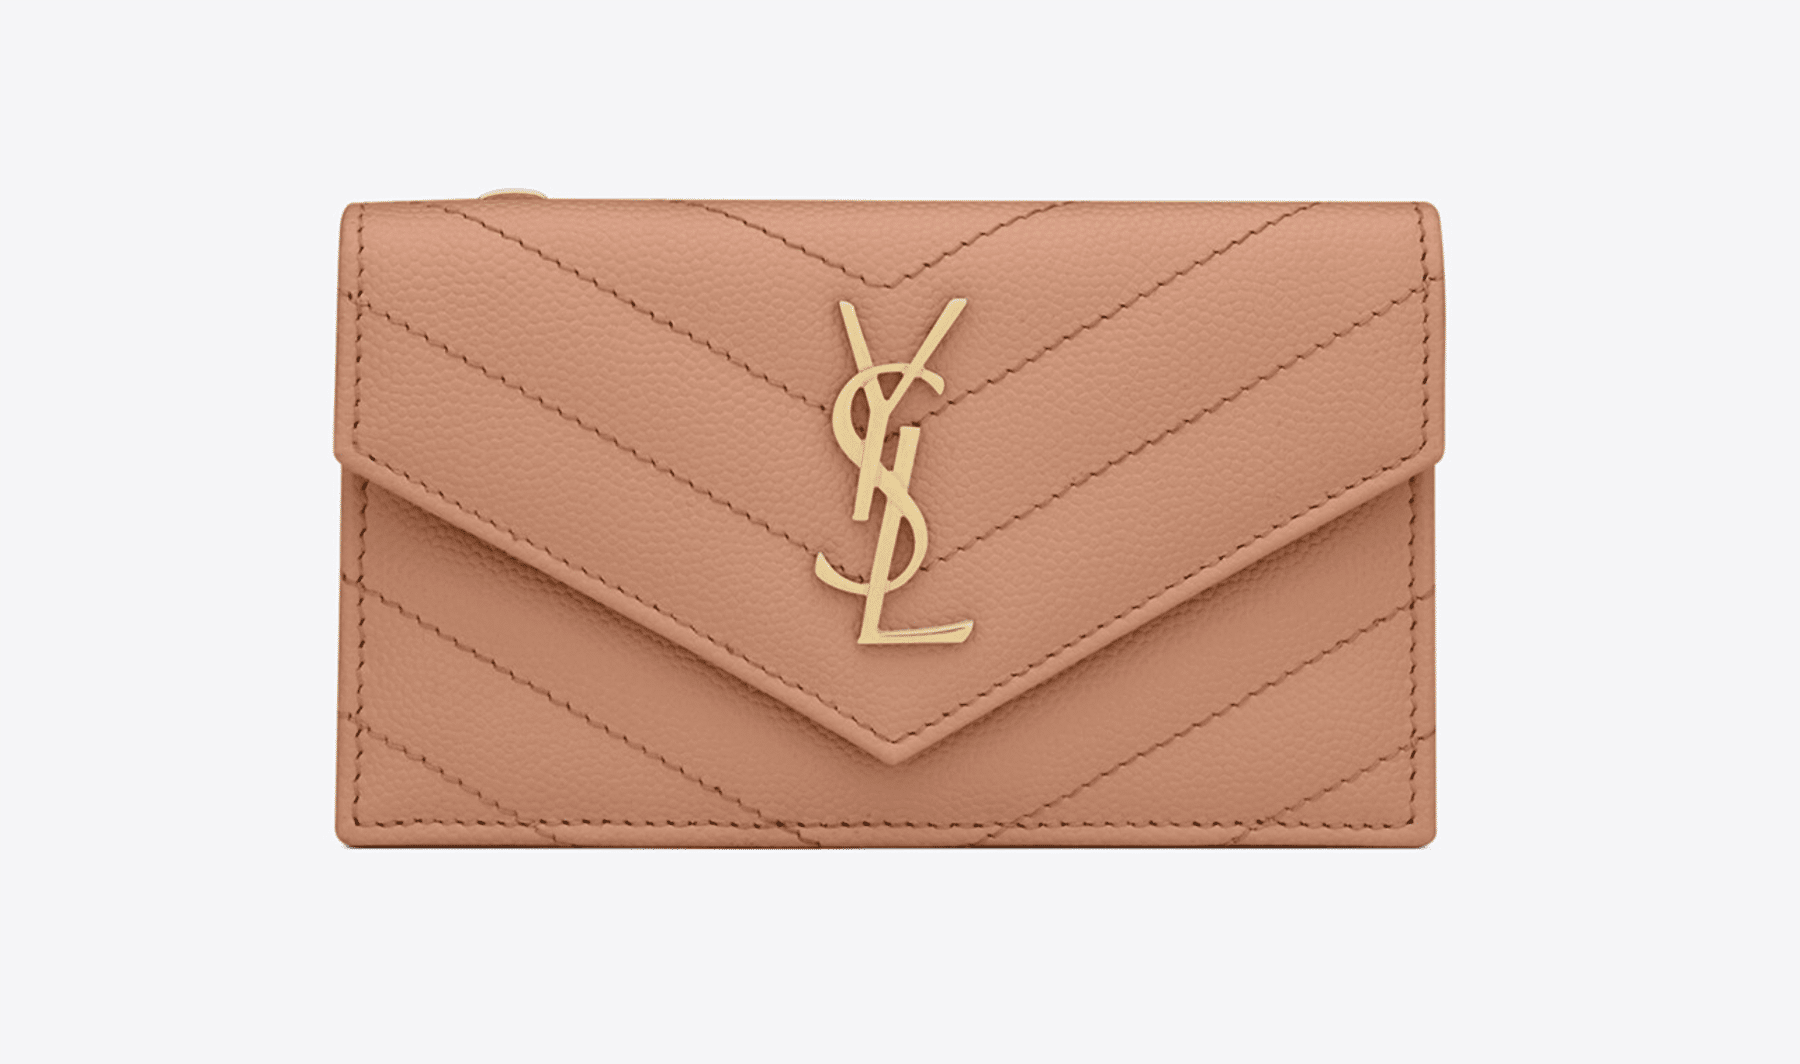 Gorgeous YSL card holder picks, by fashion blogger What The Fab